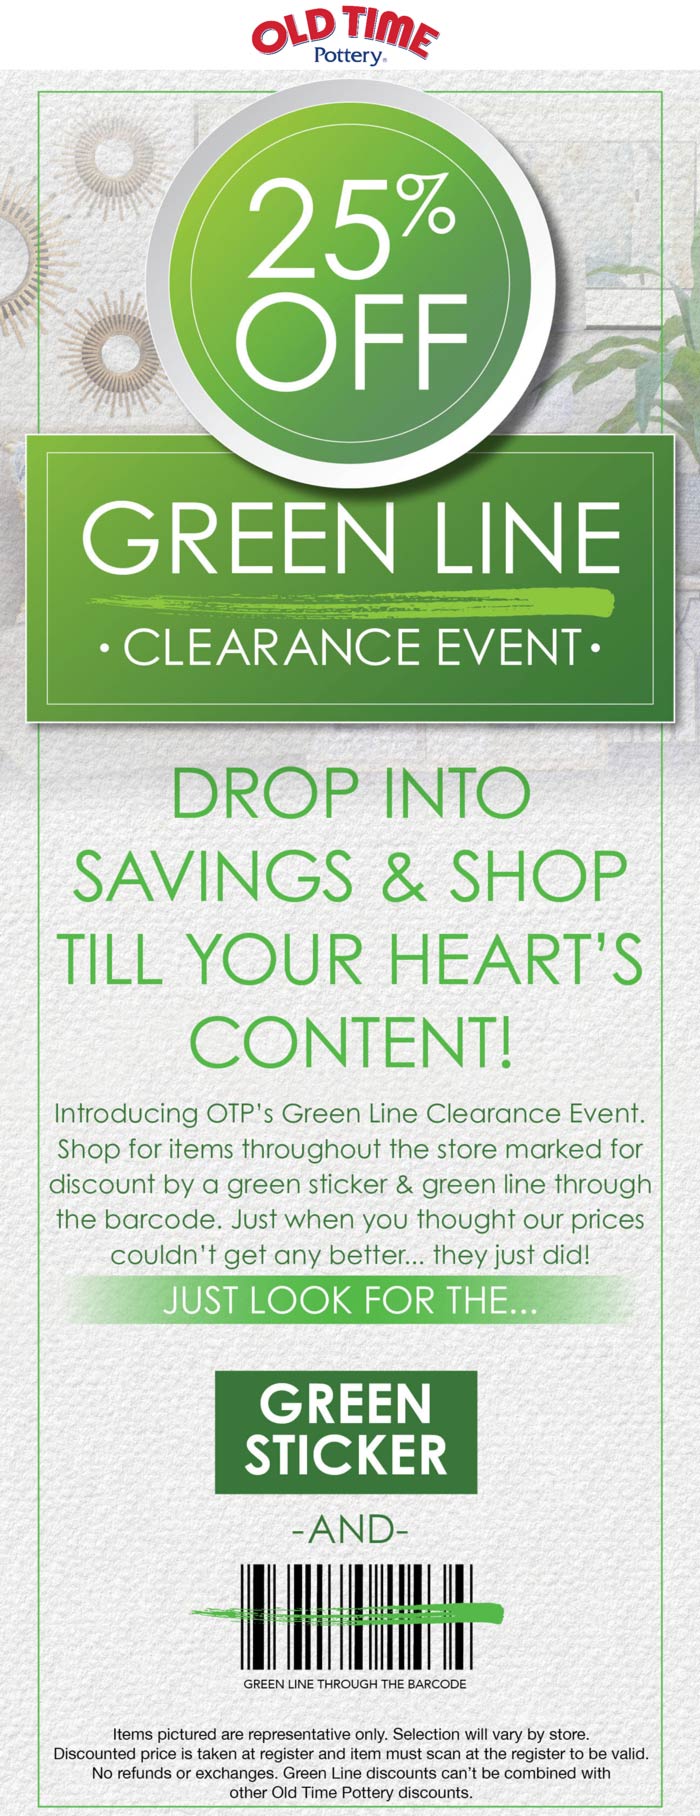 25-off-green-line-clearance-at-old-time-pottery-oldtimepottery-the